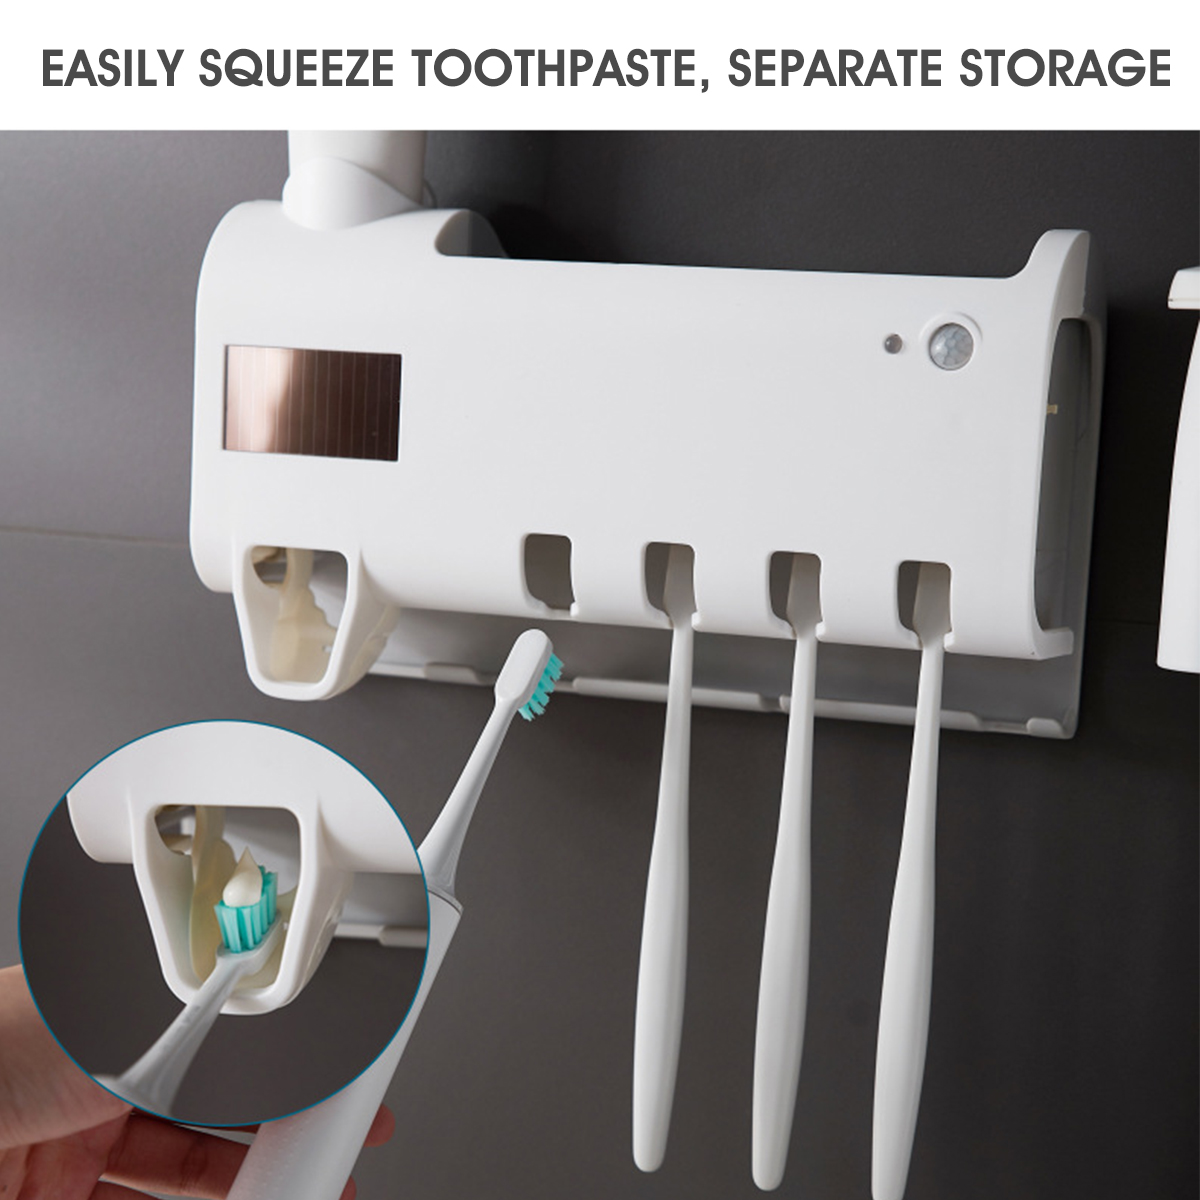 23-Layer-Non-perforated-Toothbrush-Holder-Rack-Wall-mounted-Toothbrush-Holder-Set-Mouthwash-Cup-Toot-1666828-6